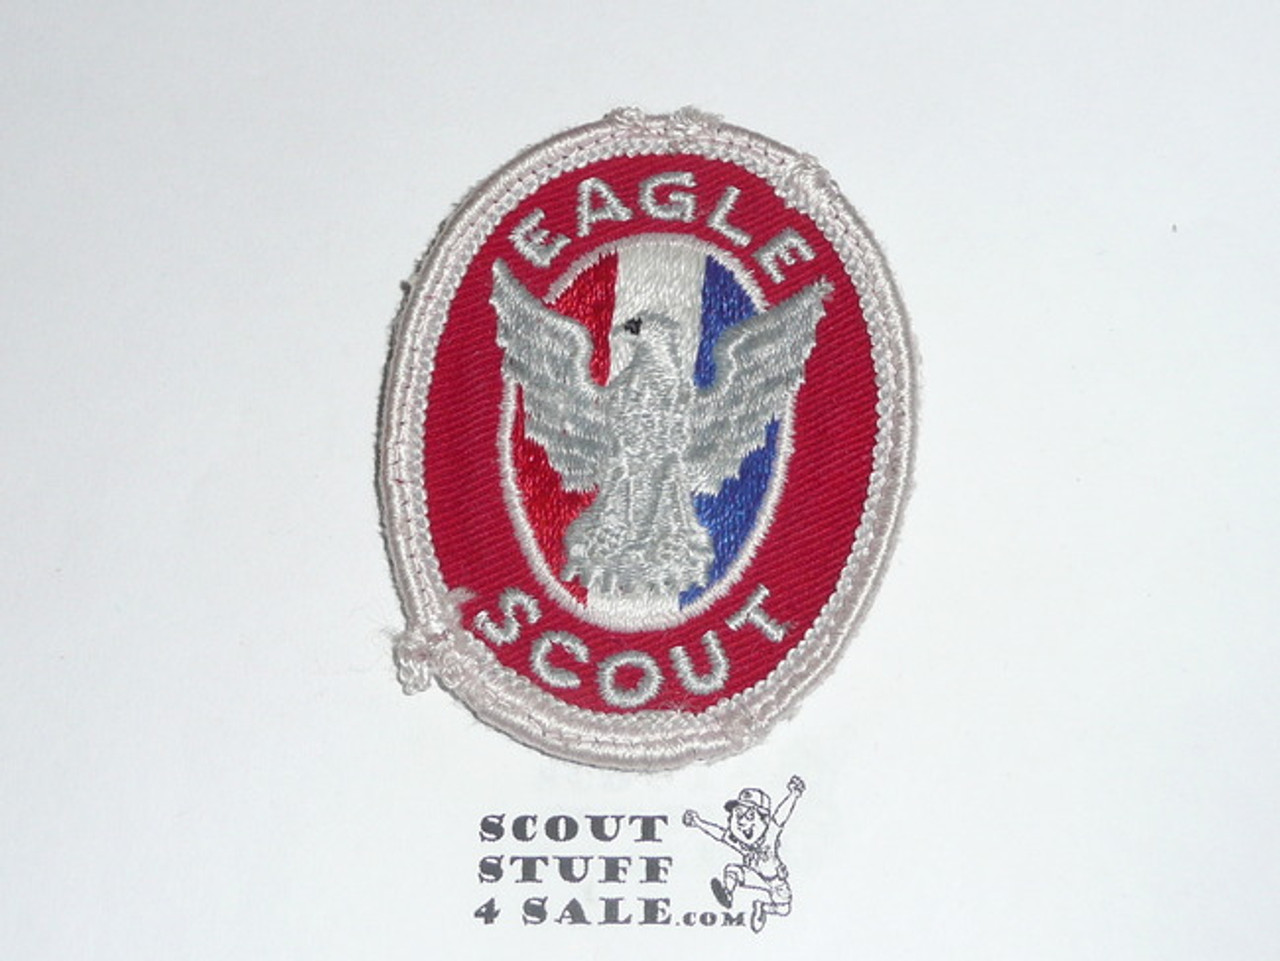 Eagle Scout Patch, Type 5A, 1975-1985, used